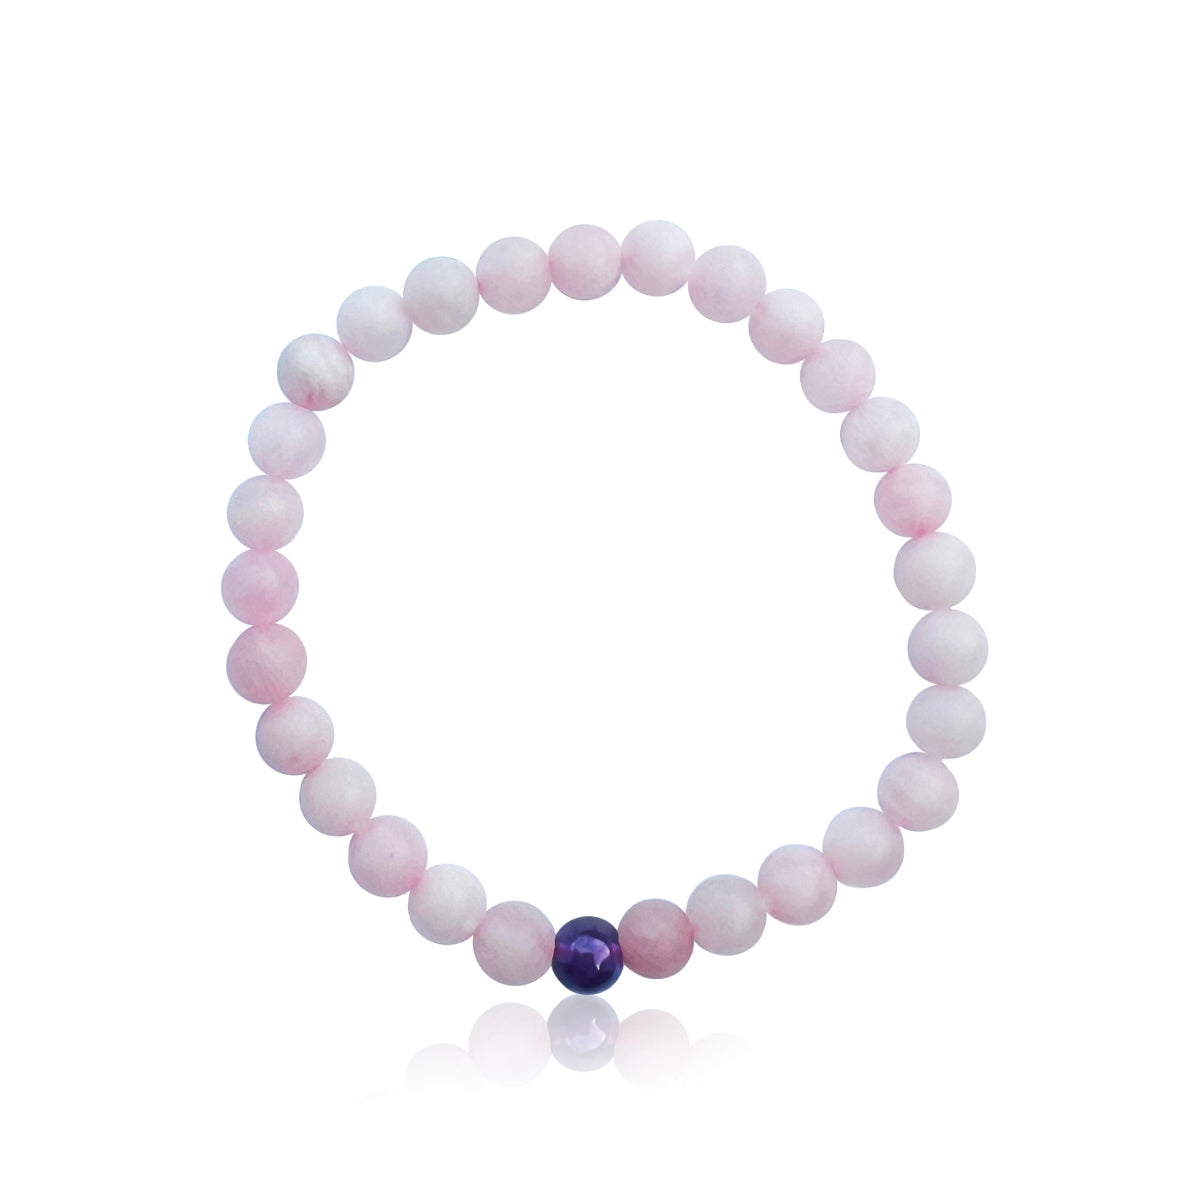 Trust your path! If you knew you were supported, what would you do? Wear this Rose Quartz Bracelet for Devotion to keep facing your True North. Rose quartz is believed to help encourage a sense of calmness, peace and devotion.